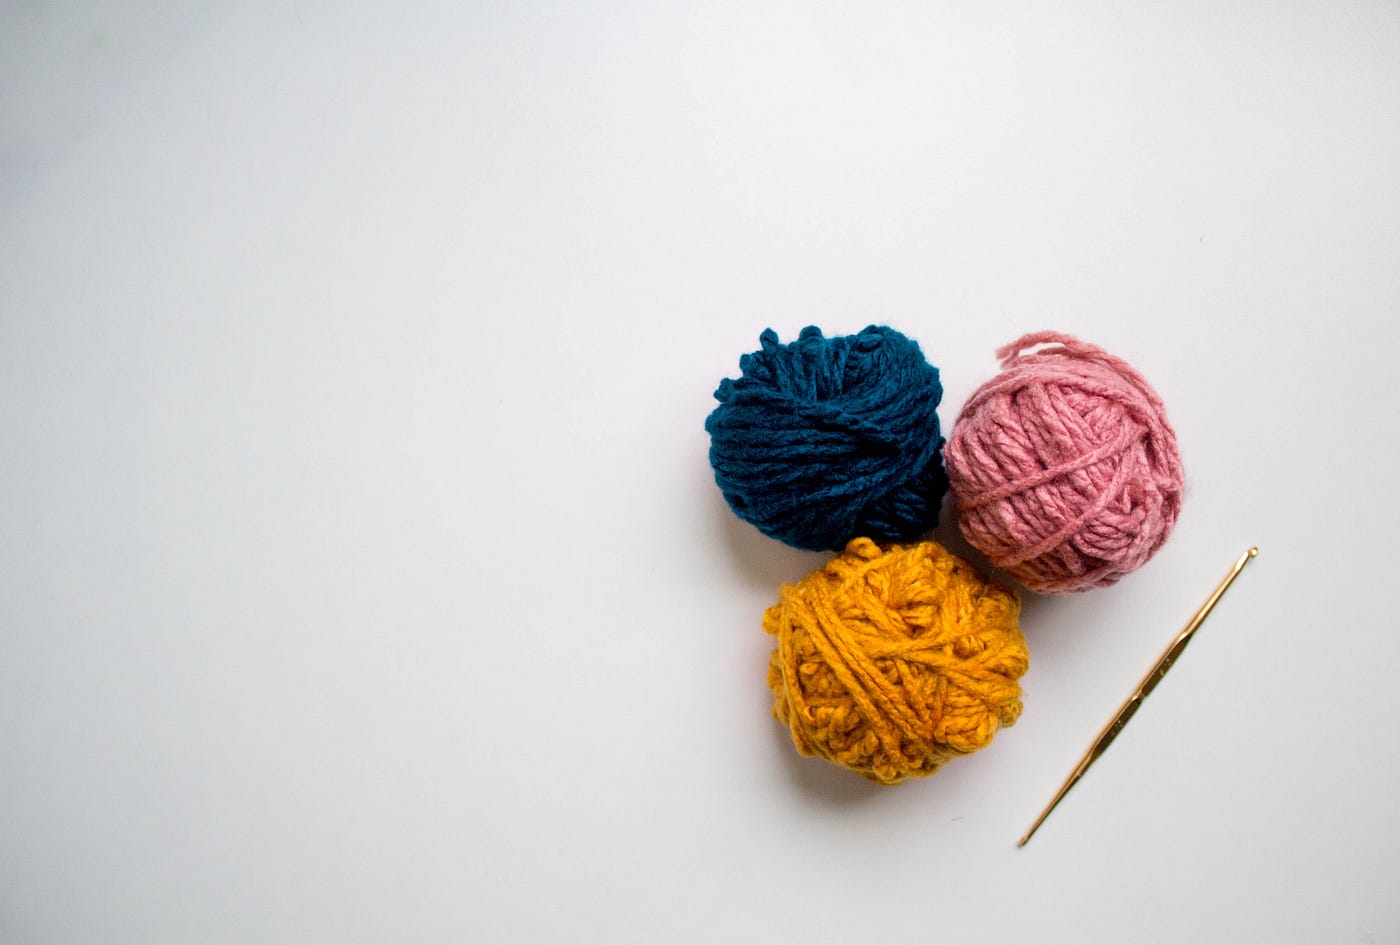 How to Make Your Own Yarn - 6 Ways! See them all on Moogly!